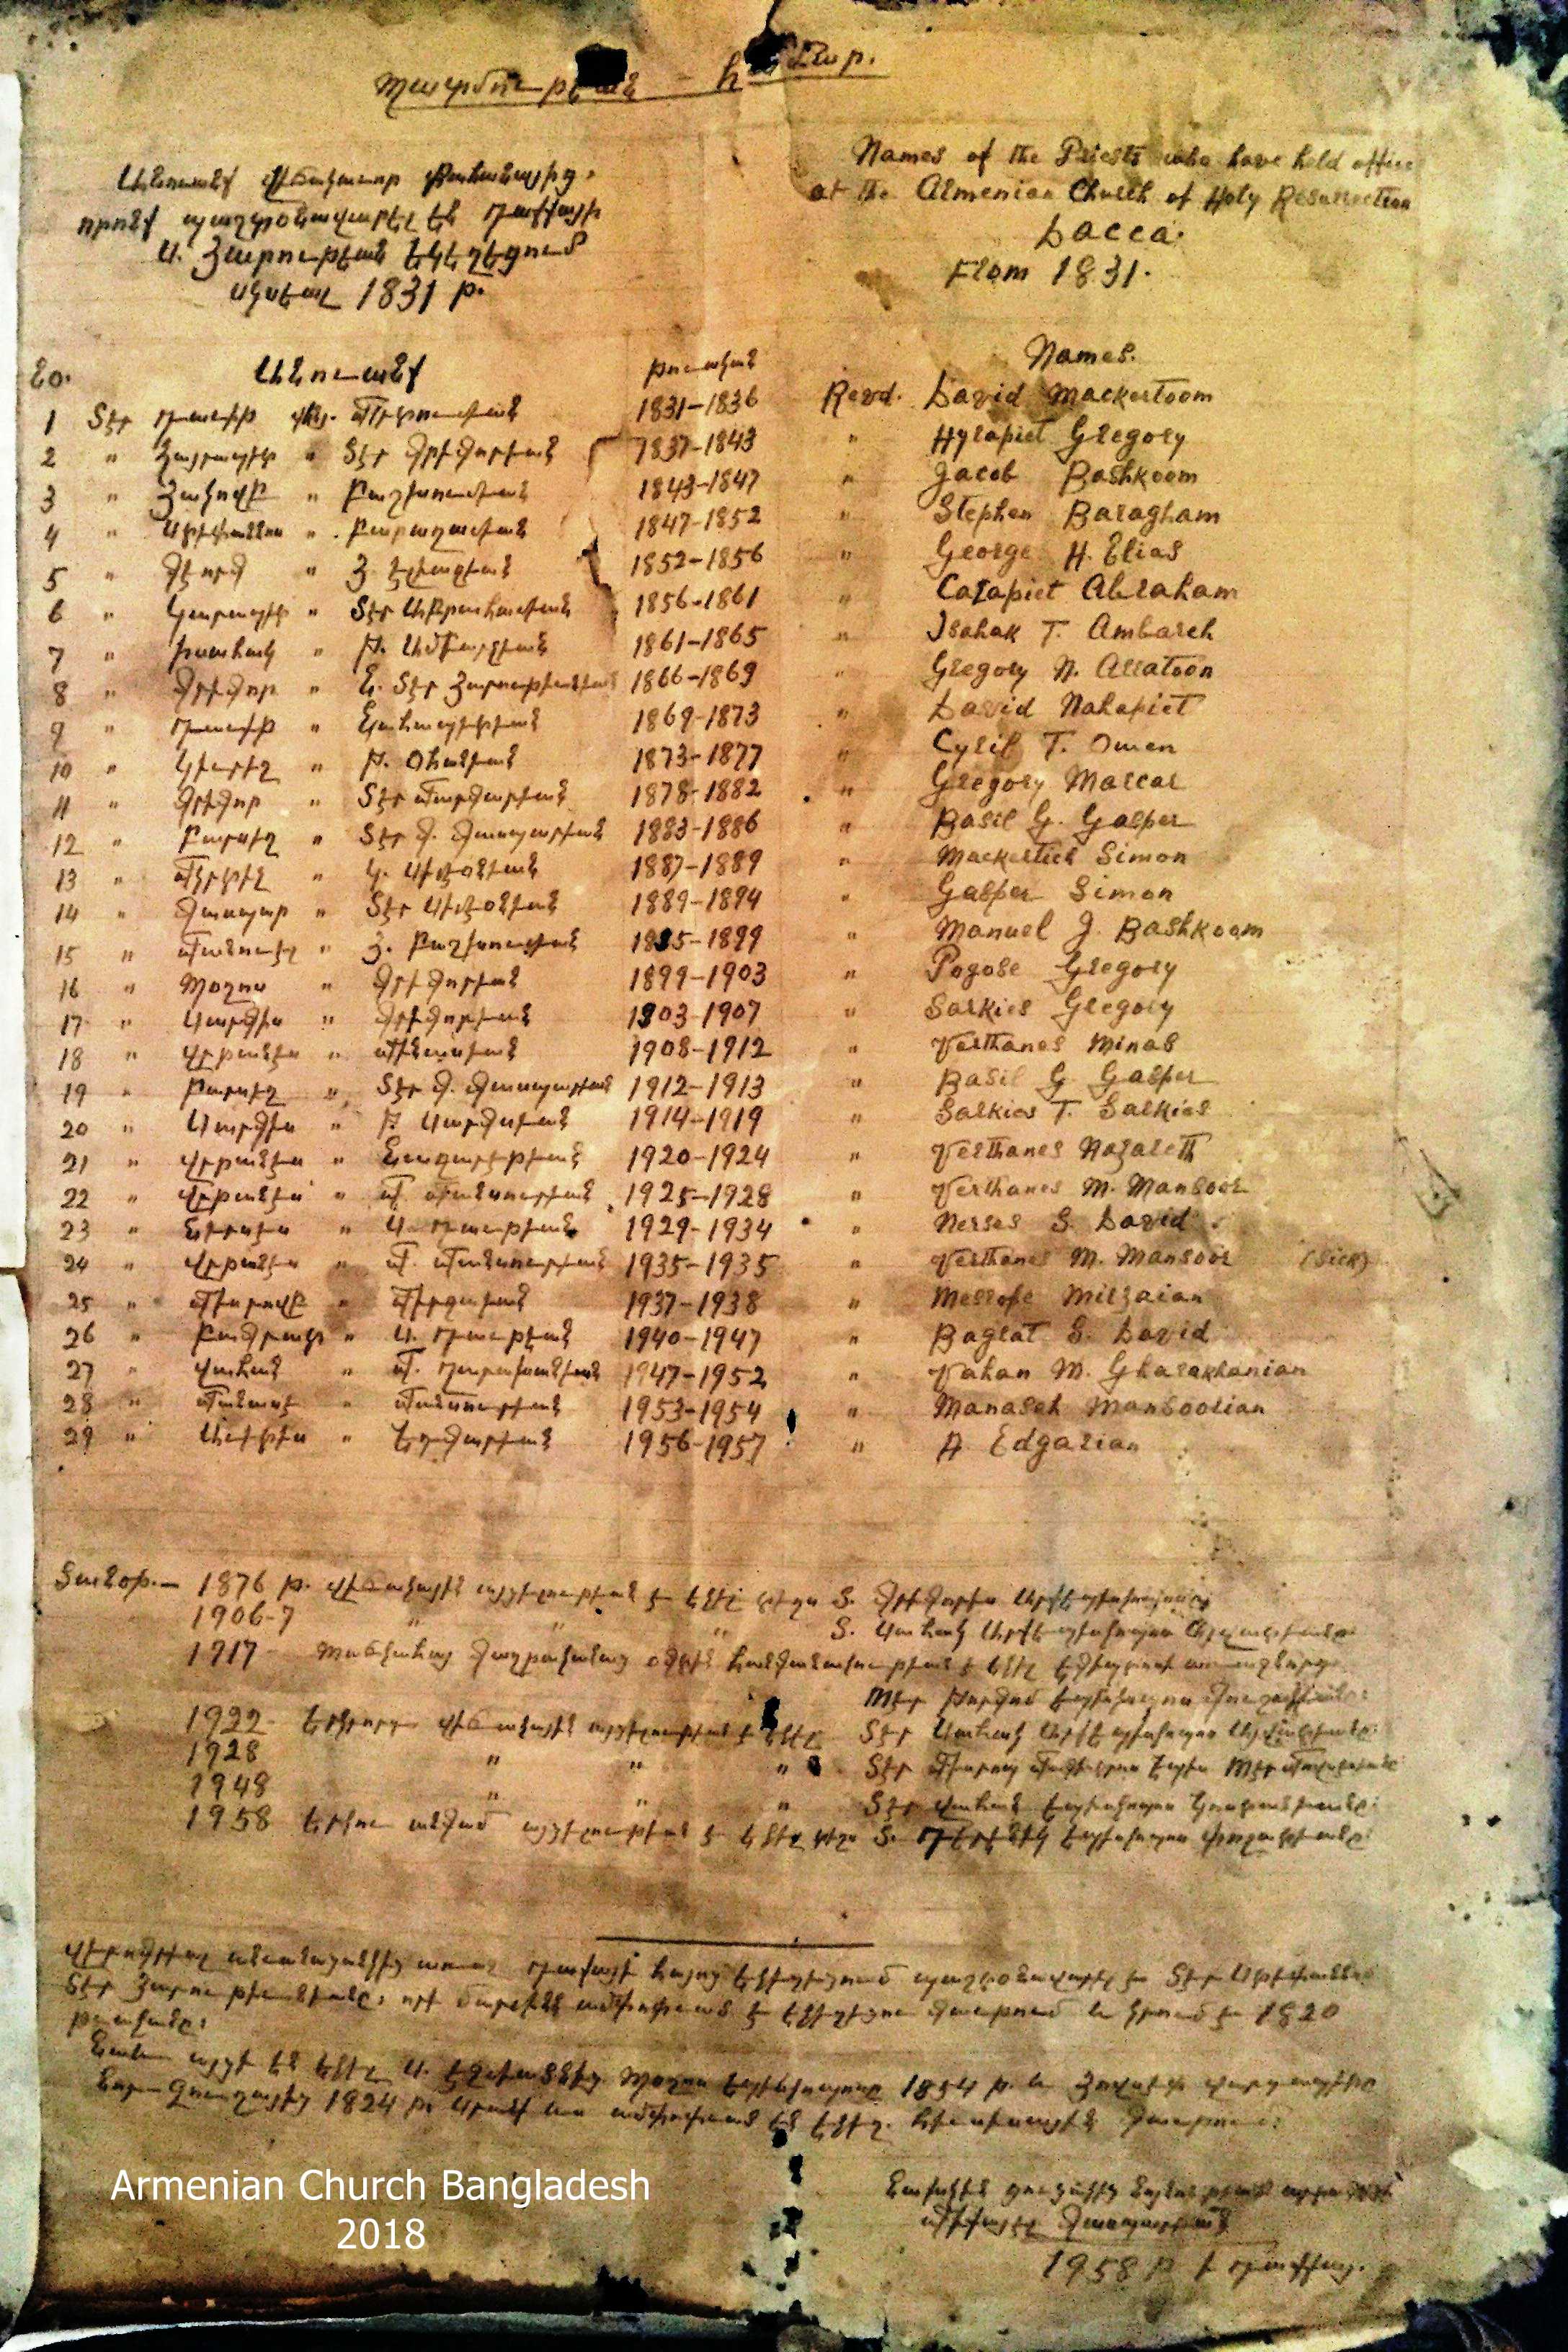 List of Priests at the Armenian Church Dacca